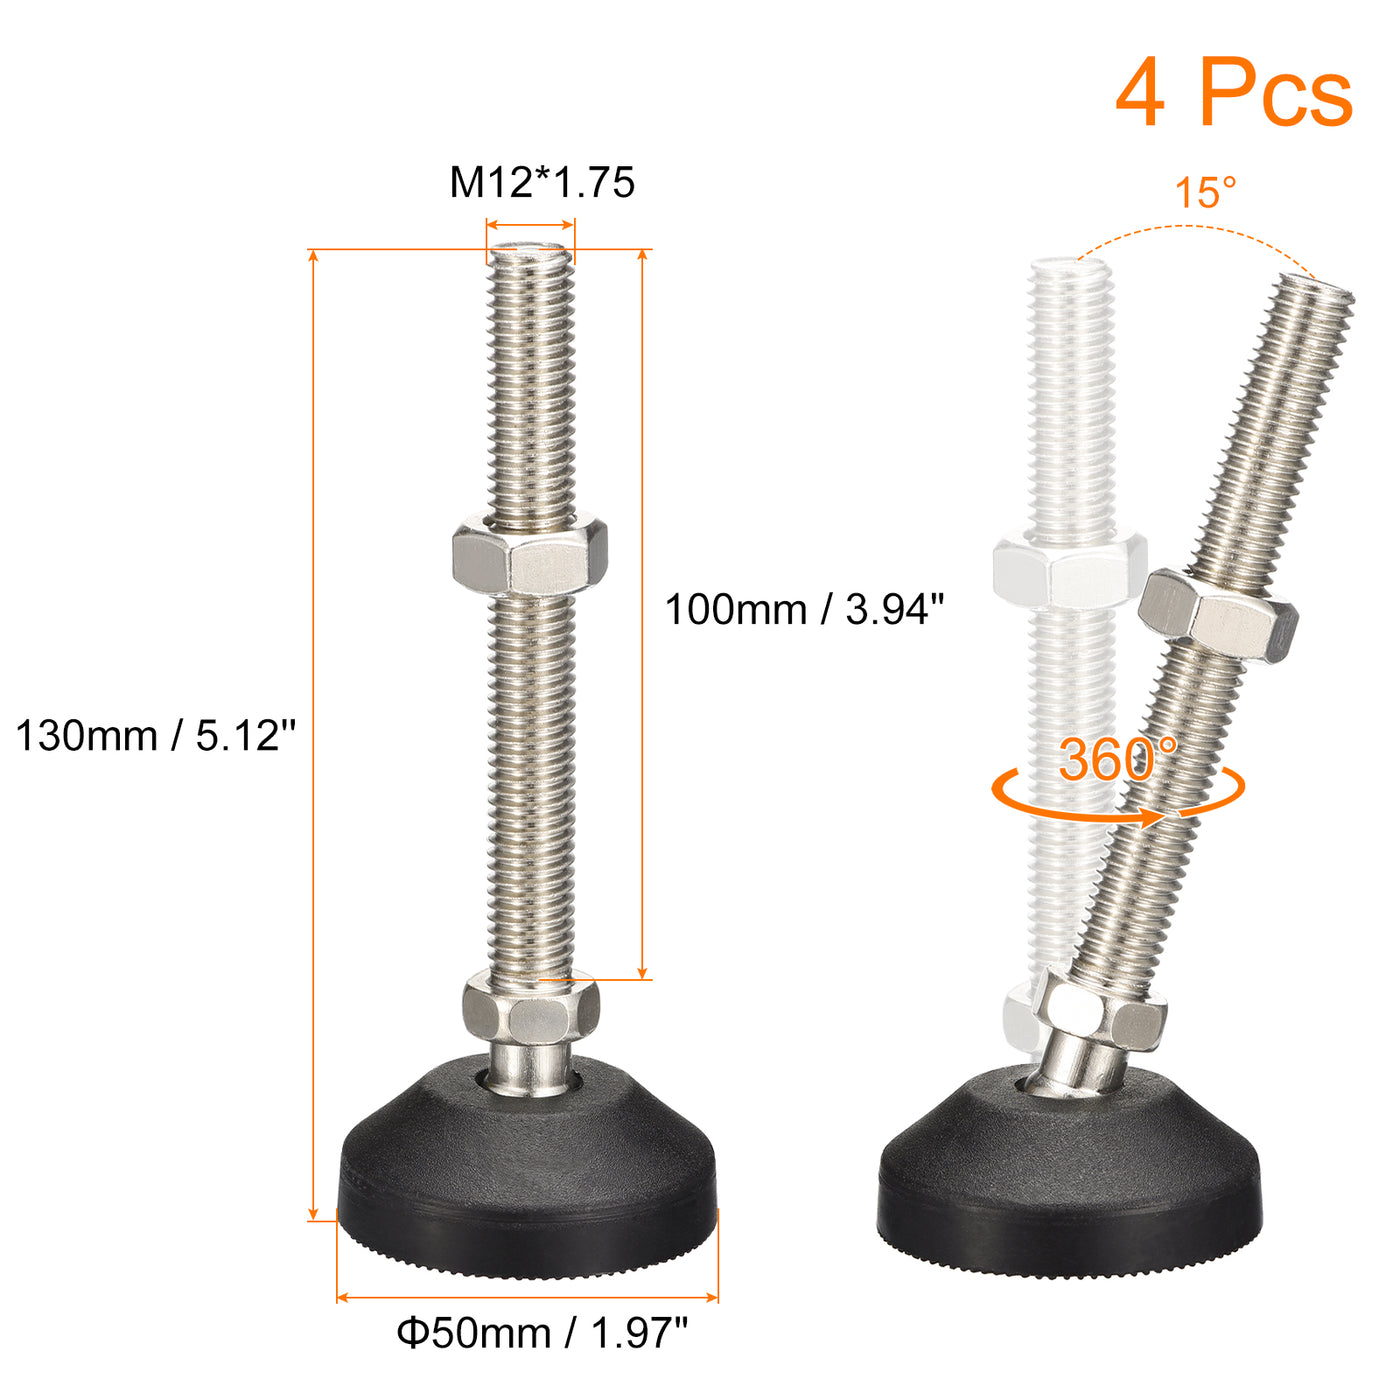 uxcell Uxcell Furniture Levelers, 4Pcs M12x100x50mm Nylon Universal Leveling Feet, Adjustable Swivel Table Feet for Furniture Workshop Machines Machinery Equipment